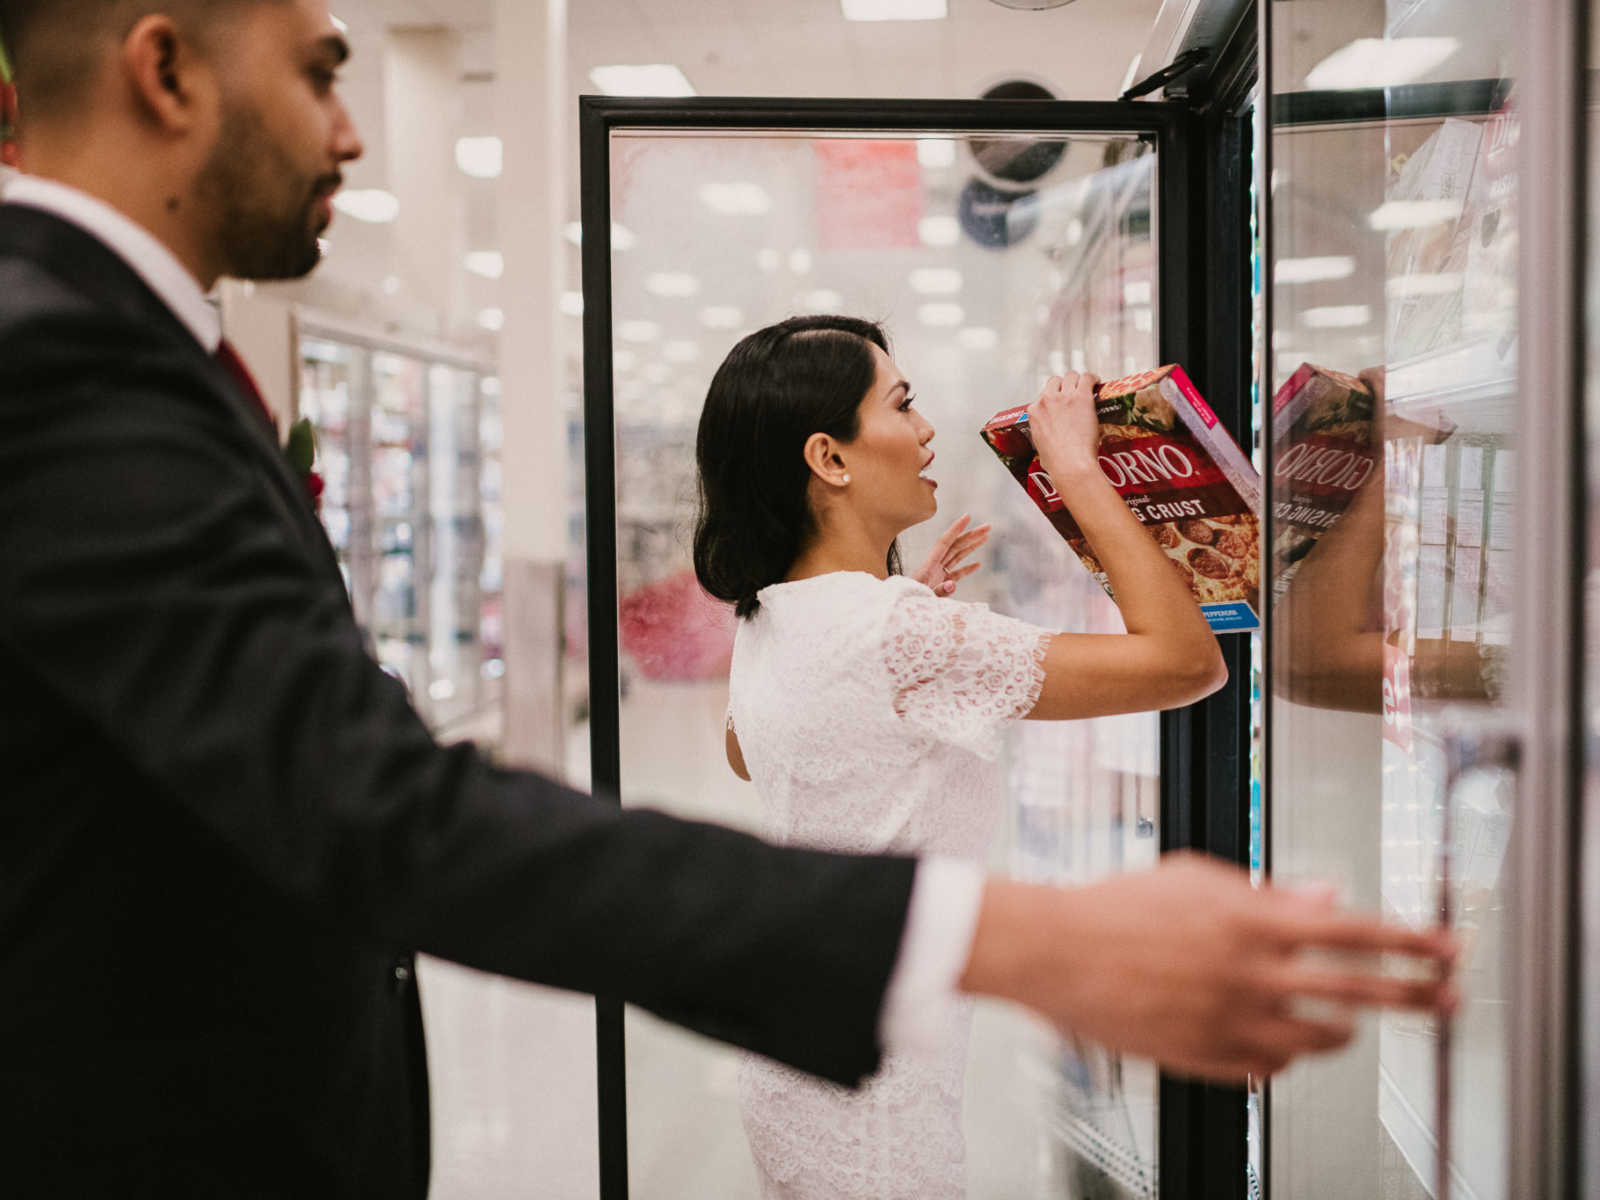 Groom looks over to see his bride grabbing a box of frozen pizza from freezer aisle at Target